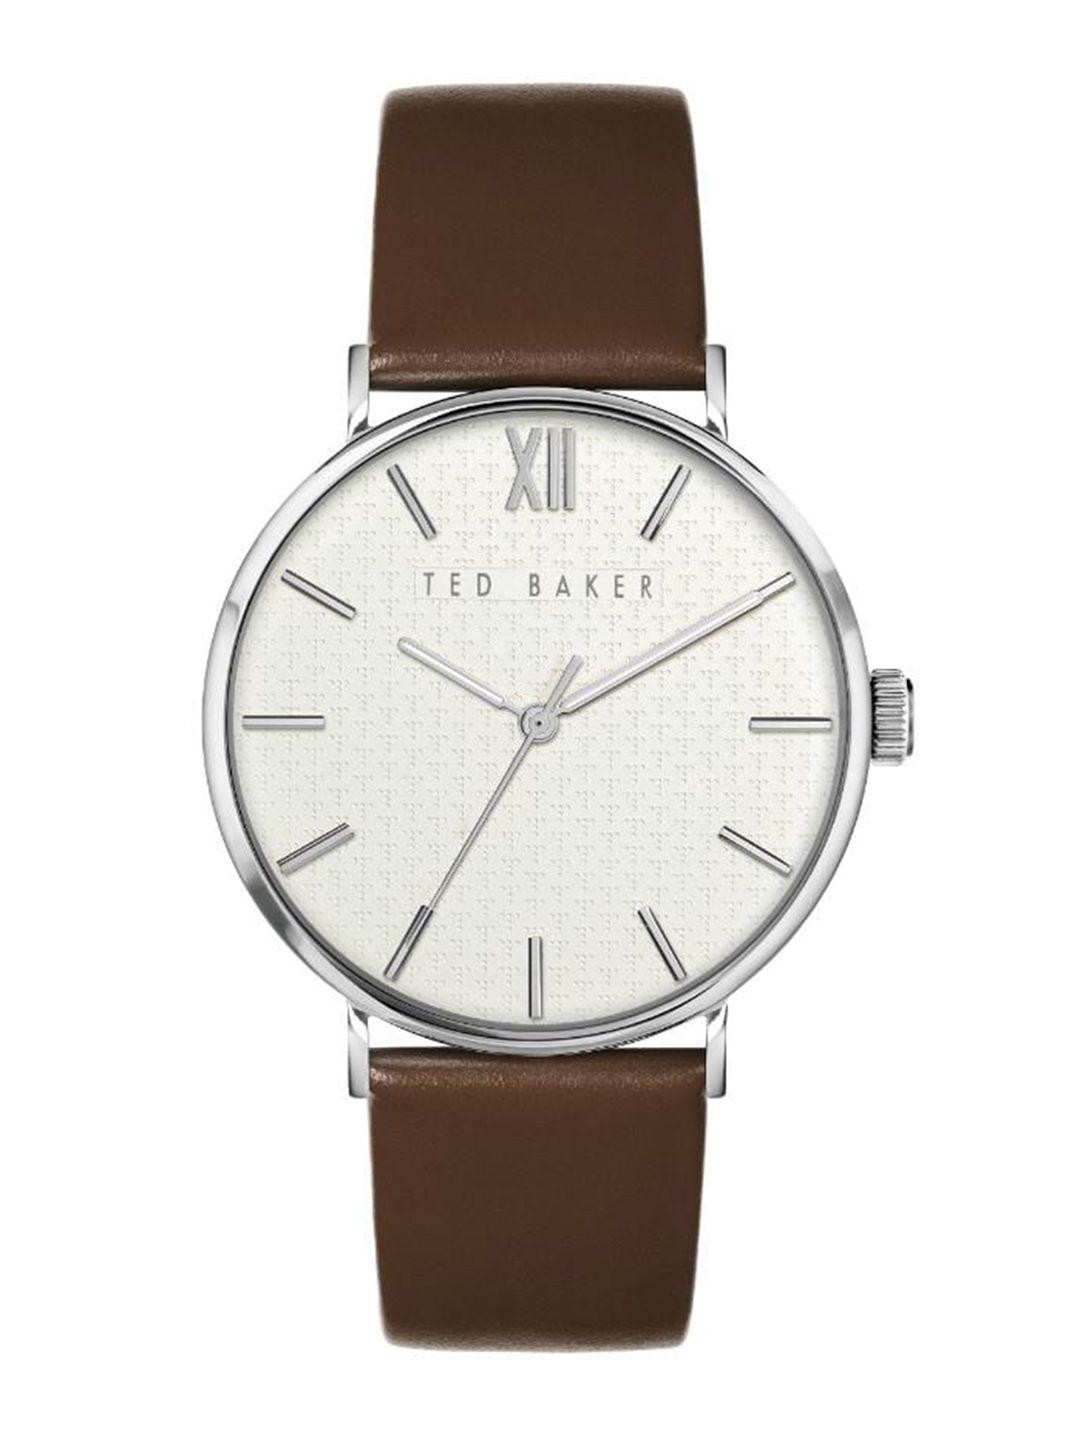 ted baker men mother of pearl dial leather straps analogue watch bkppgs215